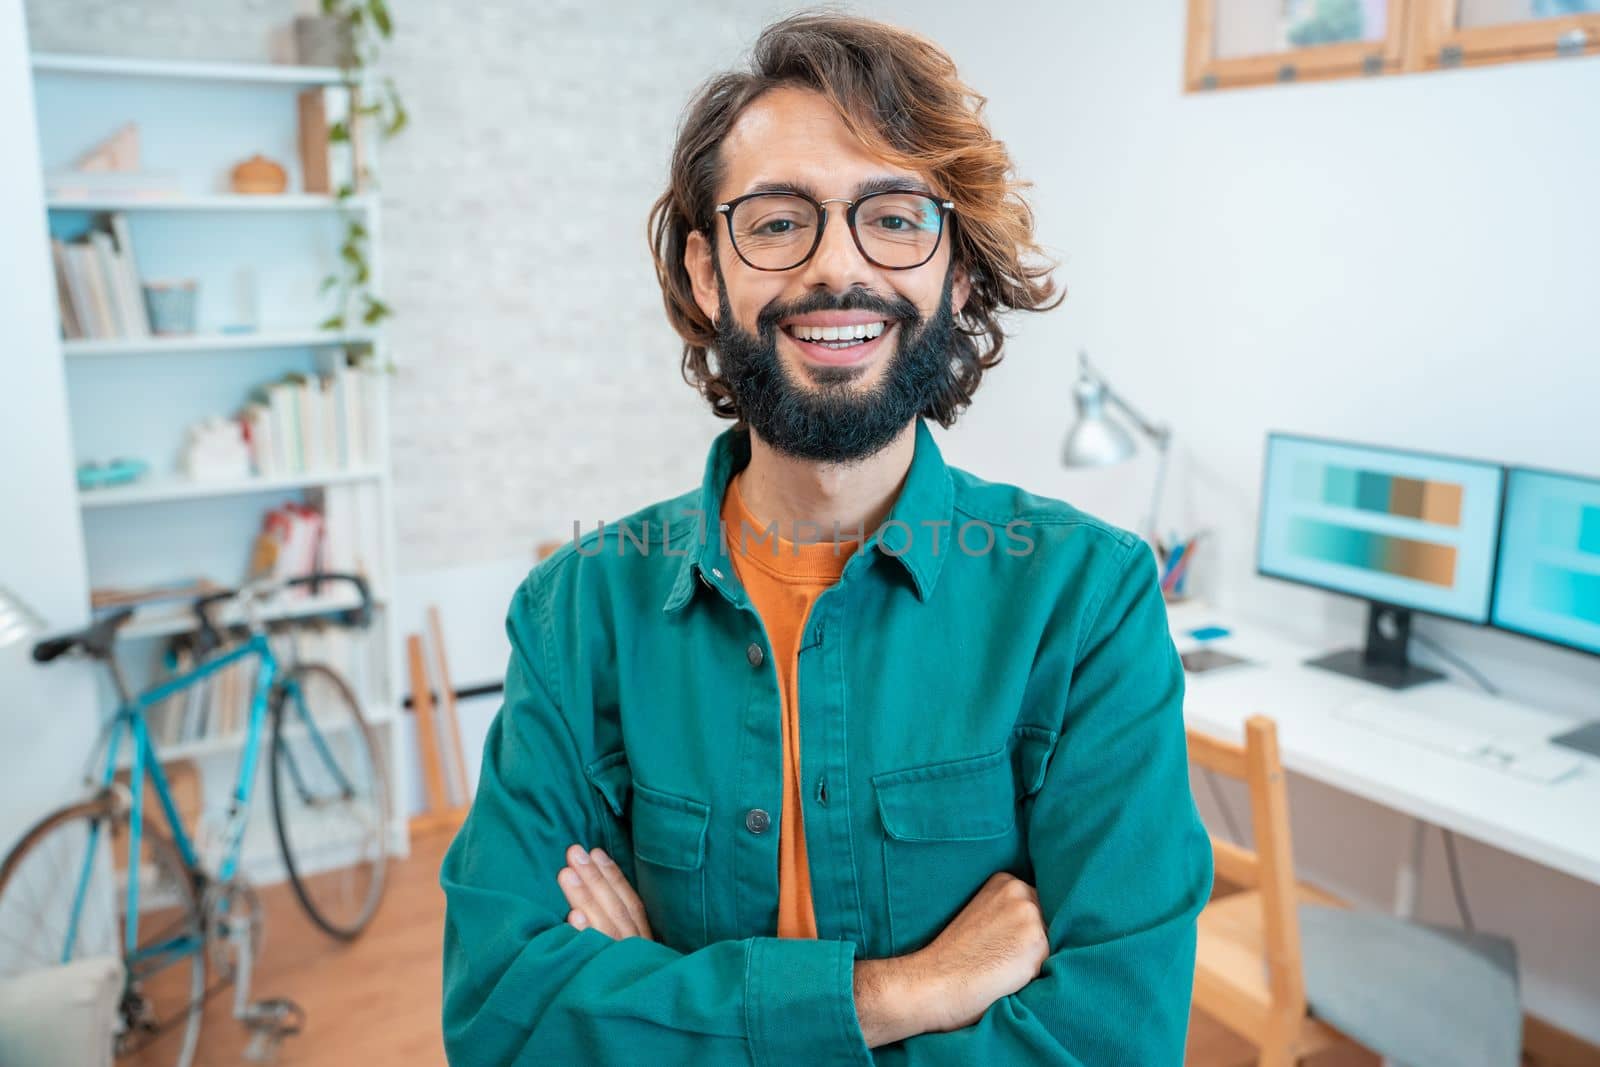 Portrait of a young creative entrepreneur smiling looking to camera in modern workplace - Portrait of millennial freelancer man in home office with bike, glasses and green jacket. High quality photo